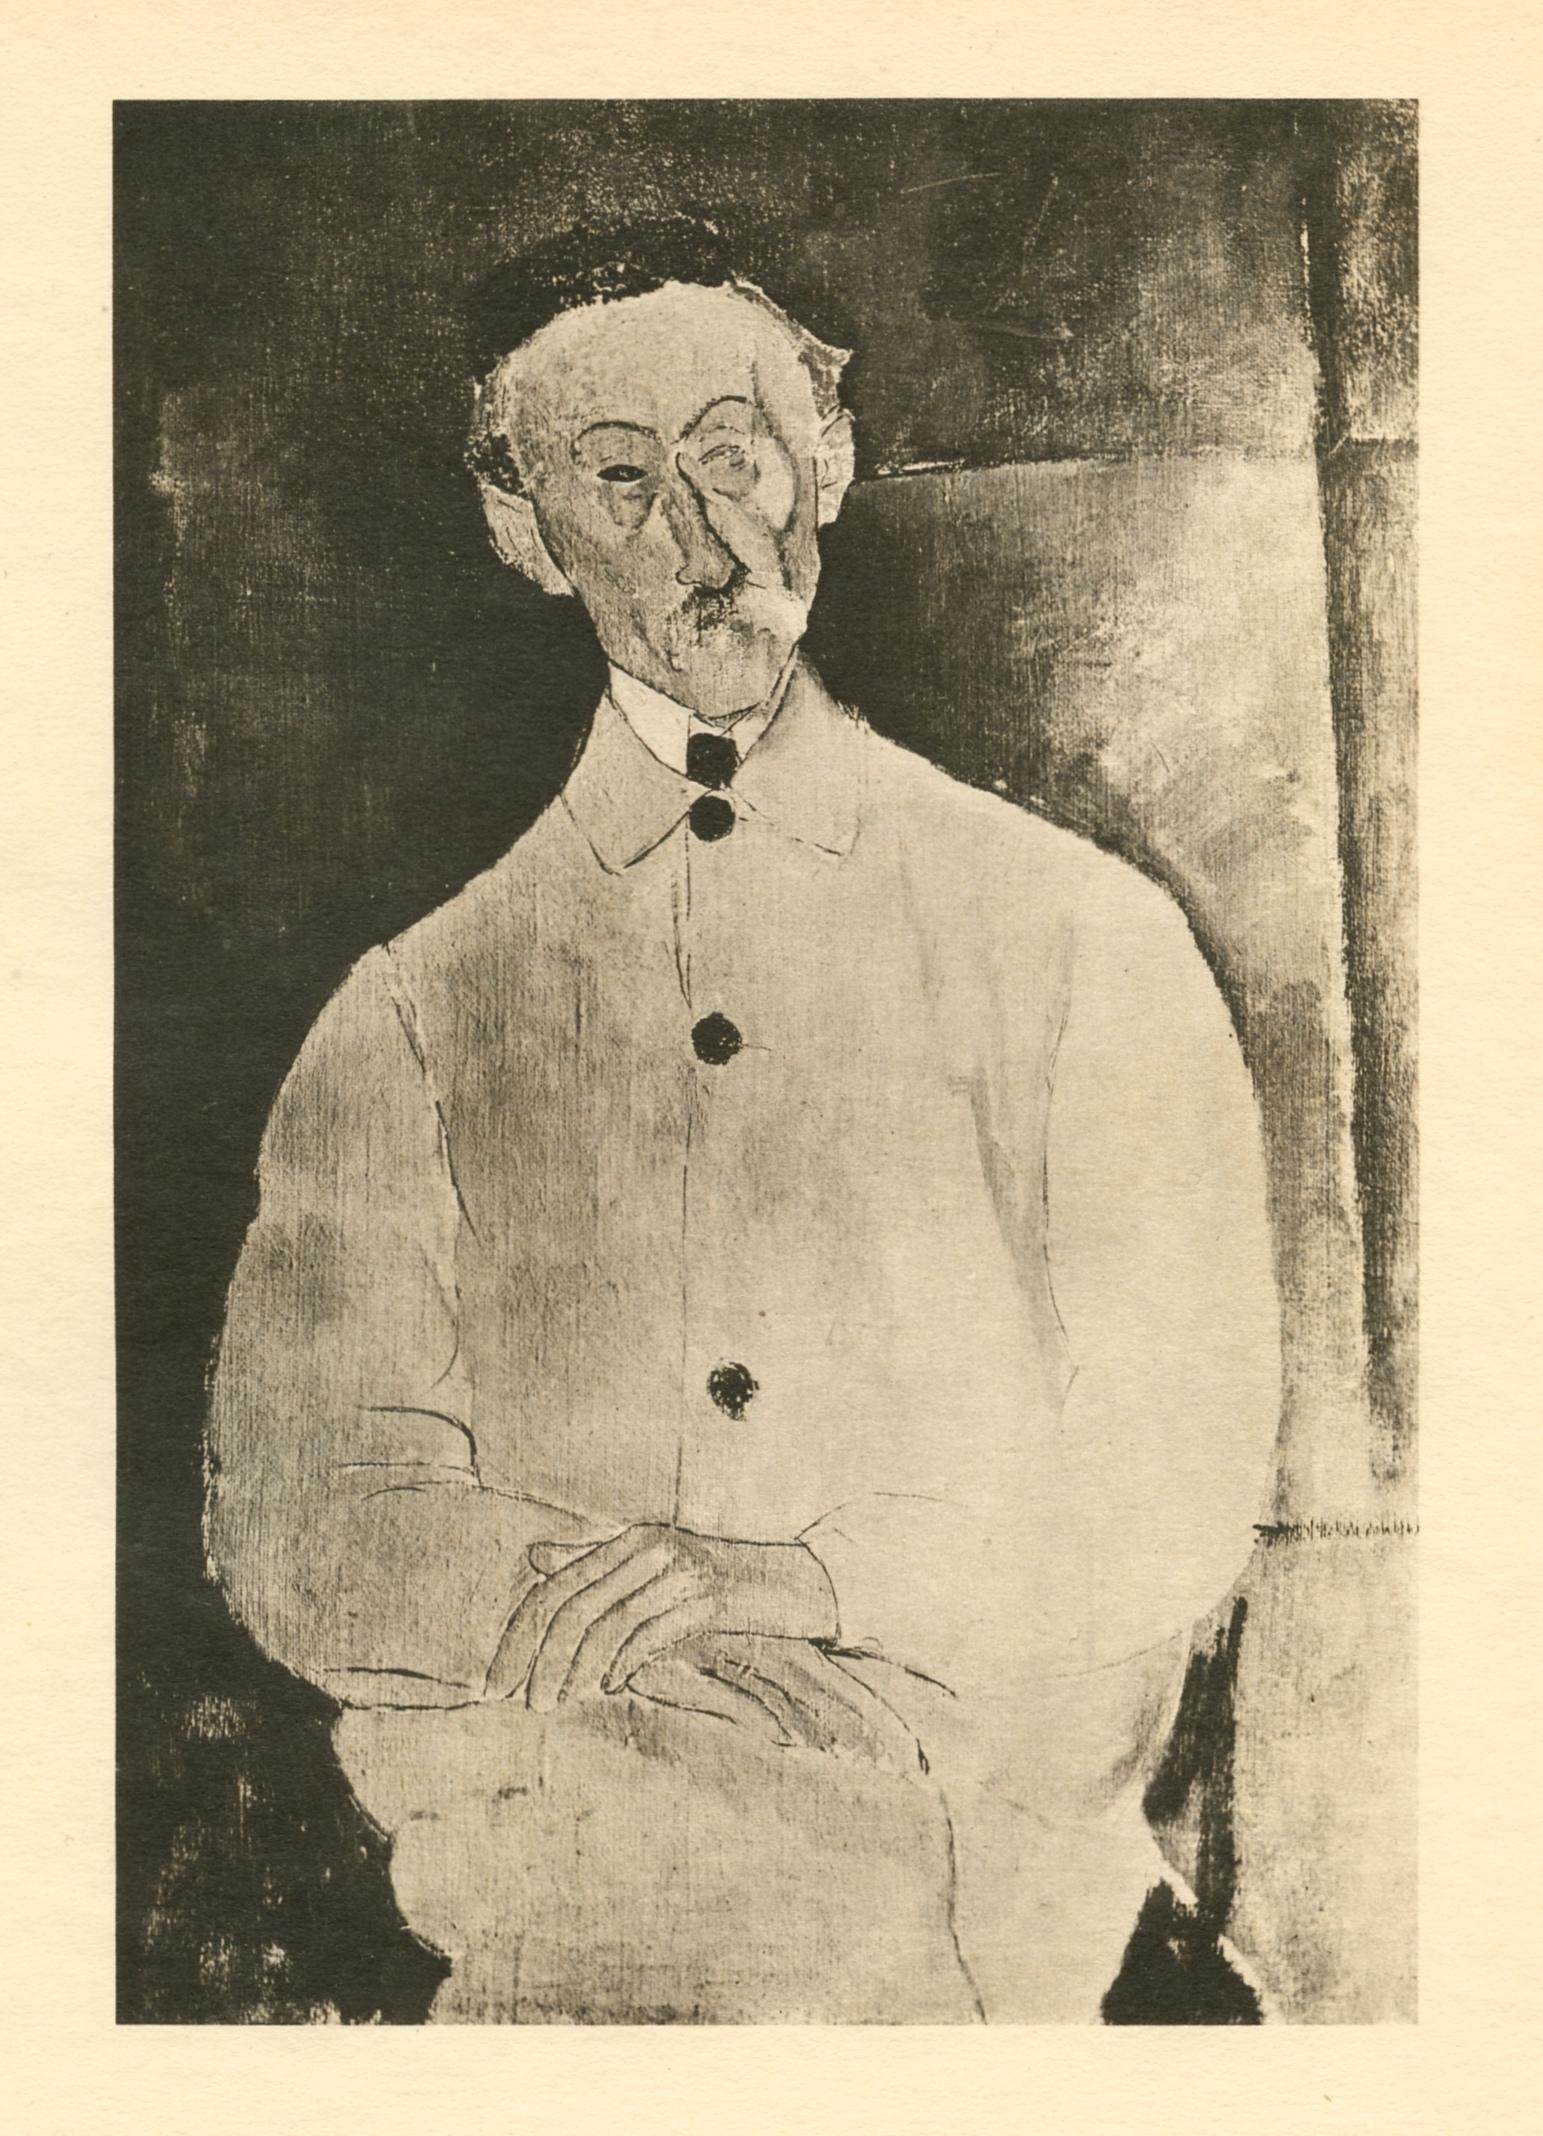 Medium: collotype (after the painting). Printed in 1926 at the Leon Marotte atelier and published in an edition of 1000 by Editions des Quatre Chemins. Image size: 8 x 5 1/2 inches (203 x 138 mm). Sheet size: 11 x 8 1/4 inches (280 x 210 mm). Not